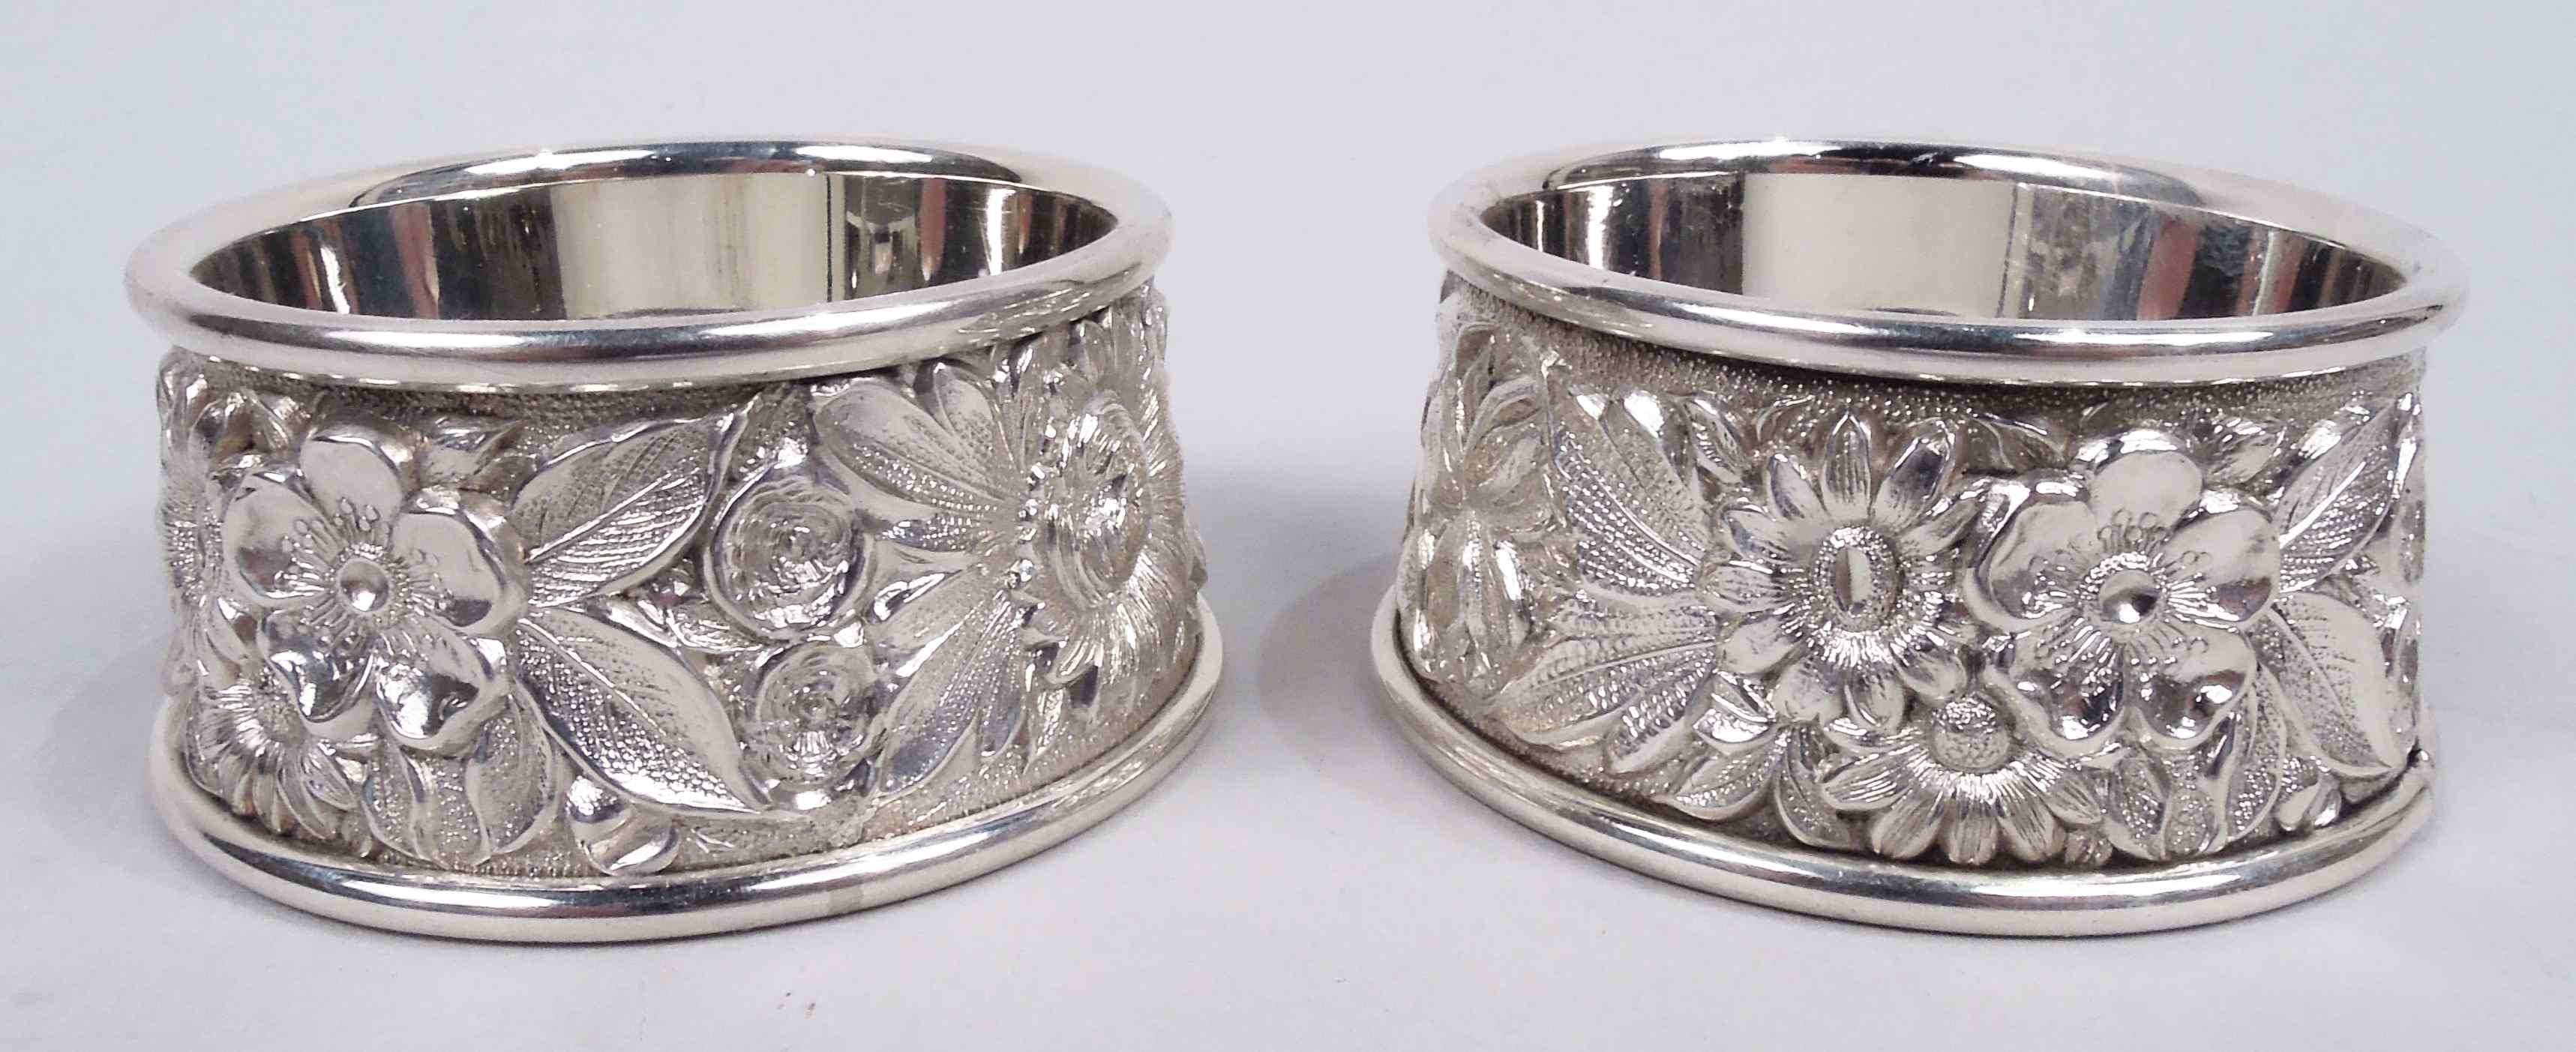 Pair of Edwardian sterling silver open salts. Made by S. Kirk Son Inc. in Baltimore. Each: Round and plain well set in upward tapering ring with repousse floral garland on stippled ground. Fully marked including maker’s stamp (1925-32) and no. 59. 